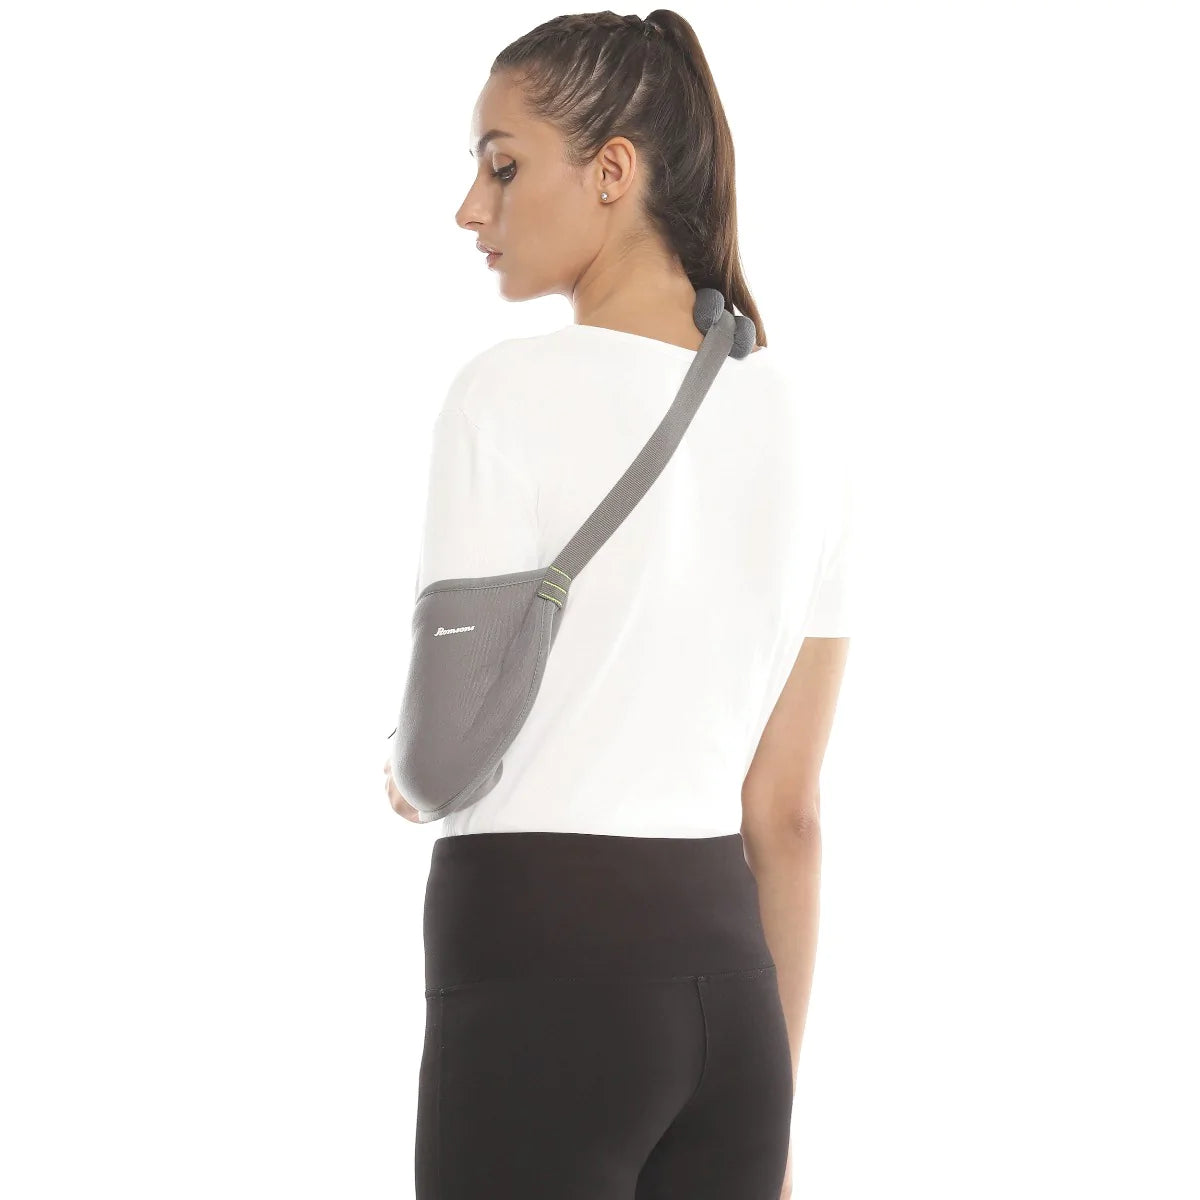 Pouch Arm Sling (1 Pc/Pack)